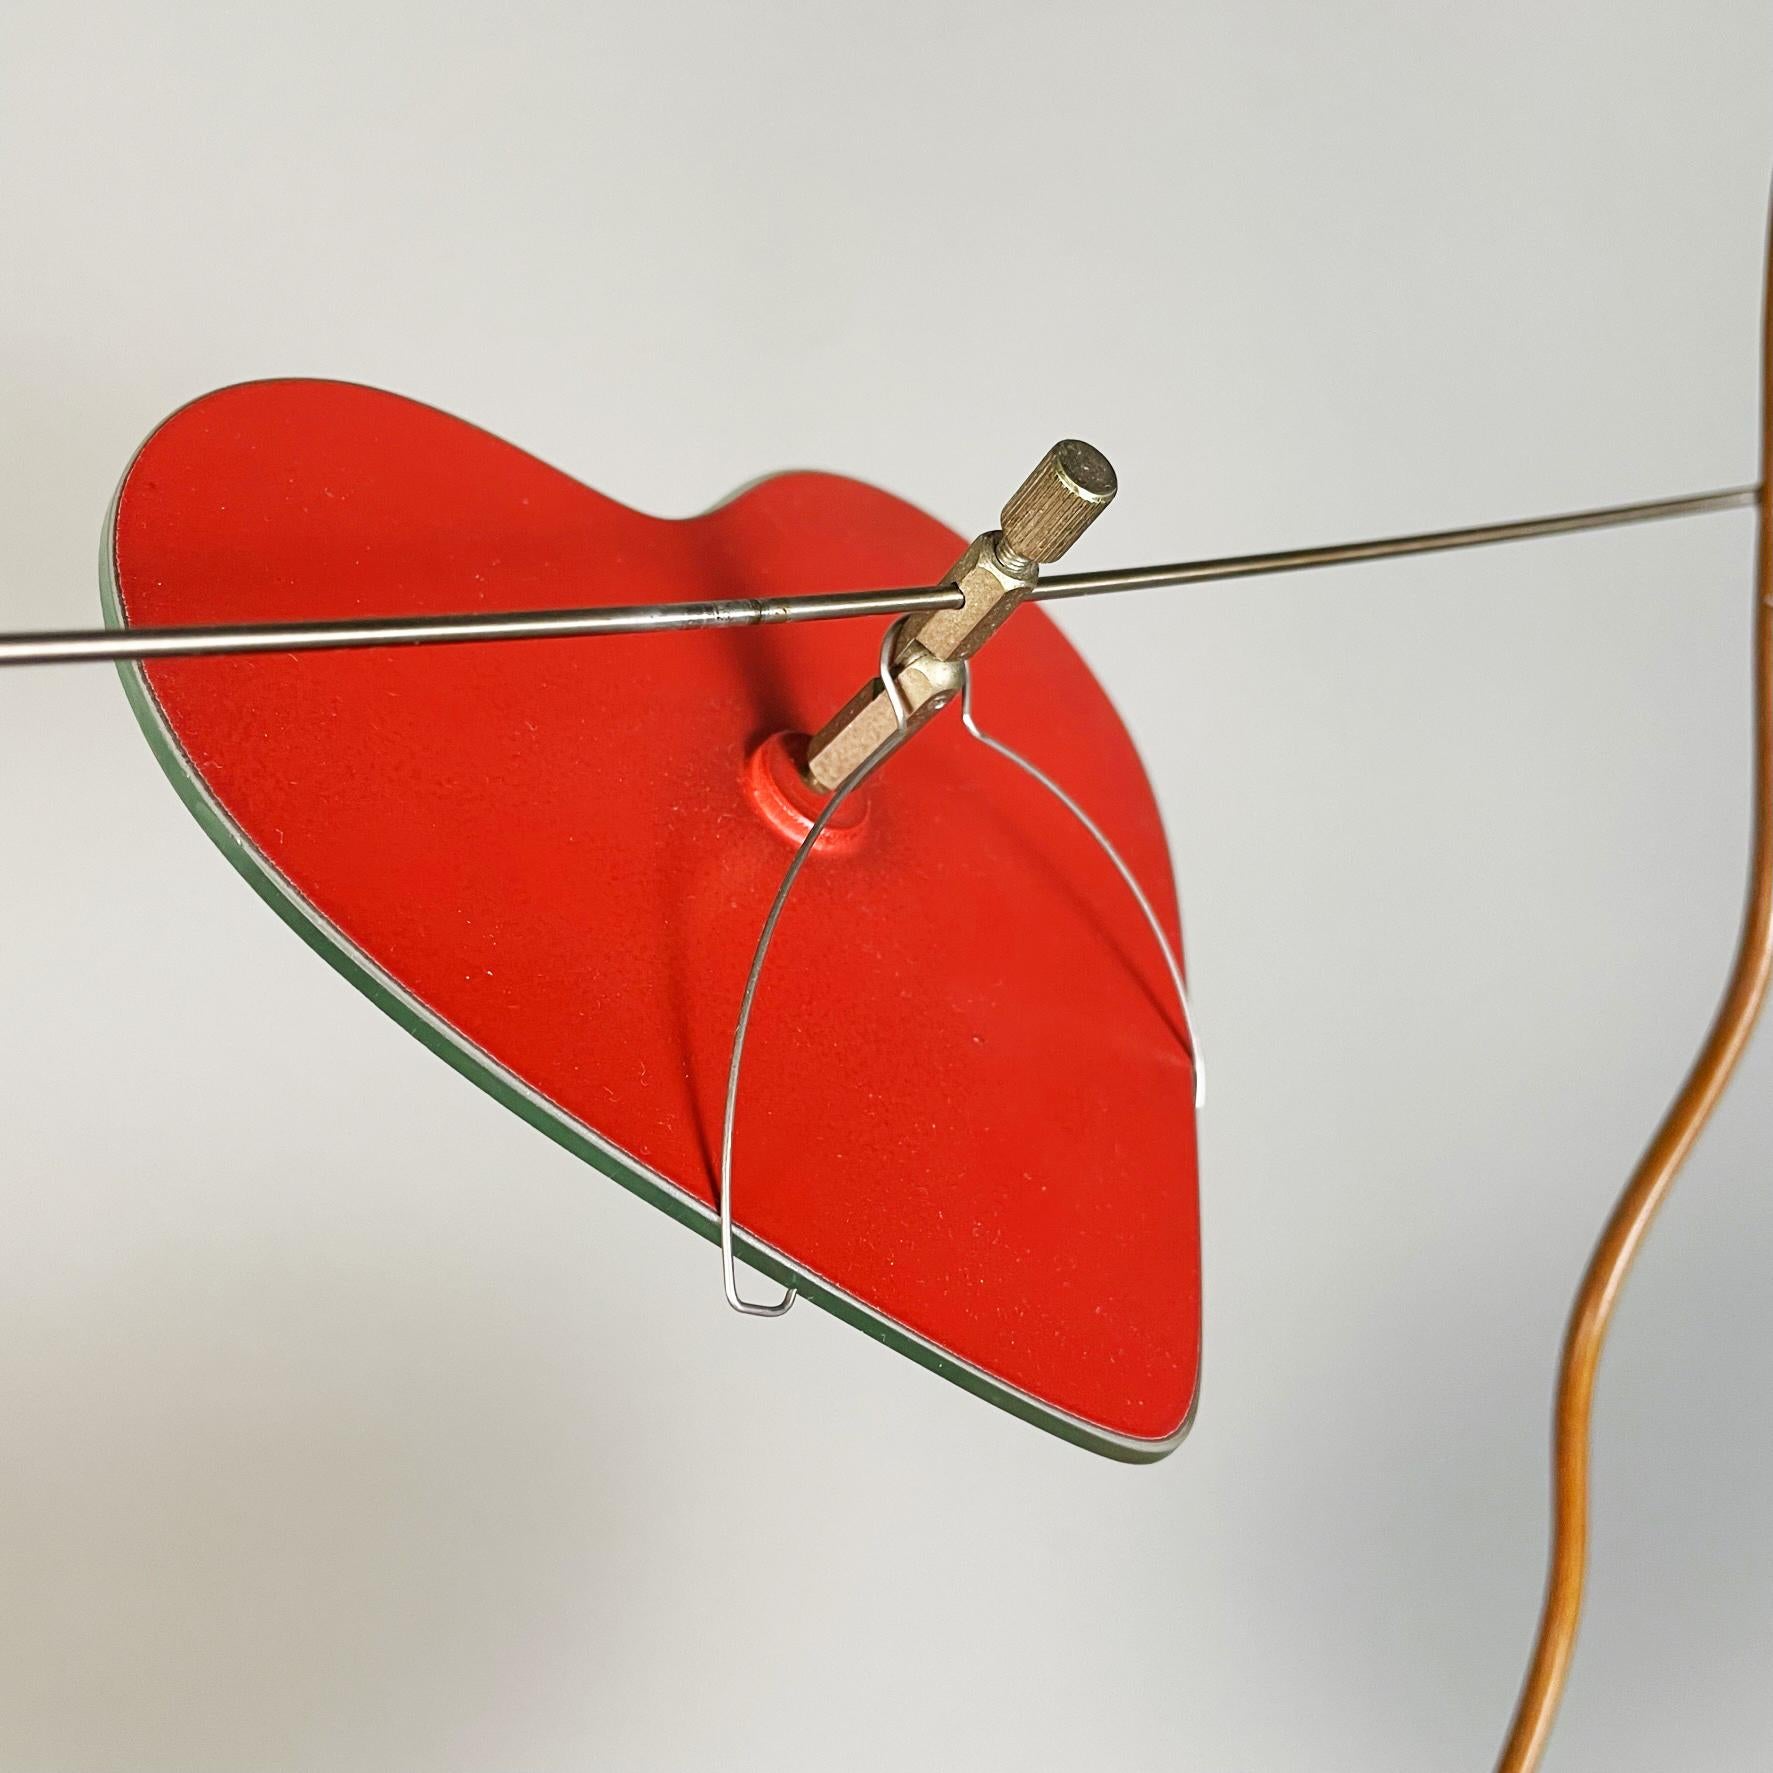 German Modern Table Lamp Mod. One from the Heart by Ingo Maurer, 1980s For Sale 1